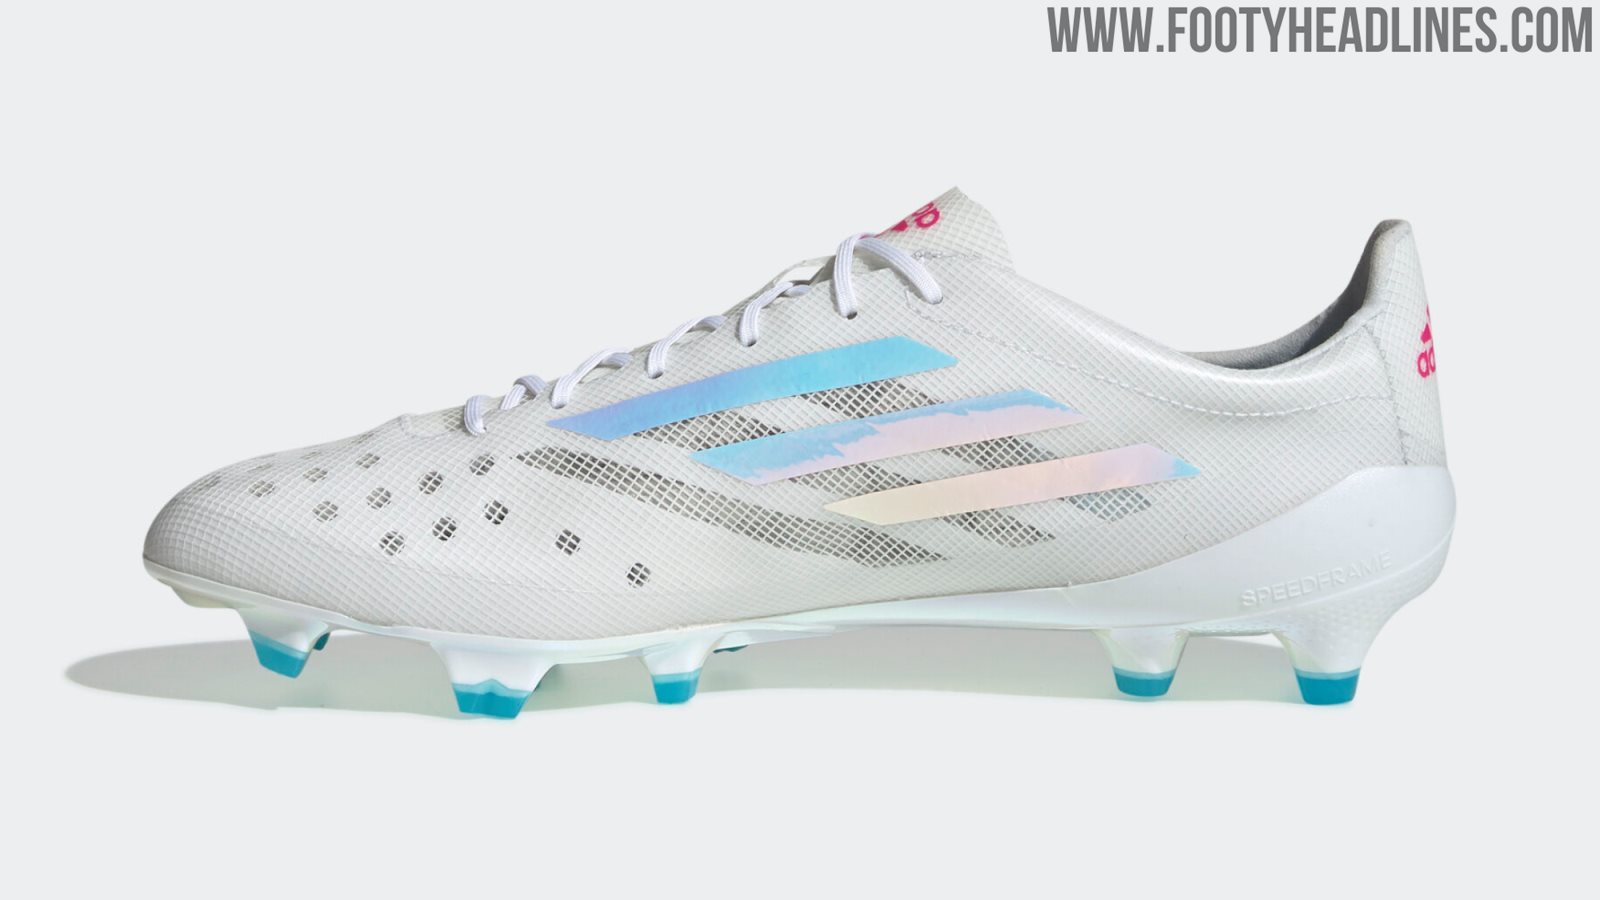 Not Even Close: "Lightweight" Adidas X 99.1 Boots Weigh Much More Than 99 Footy Headlines